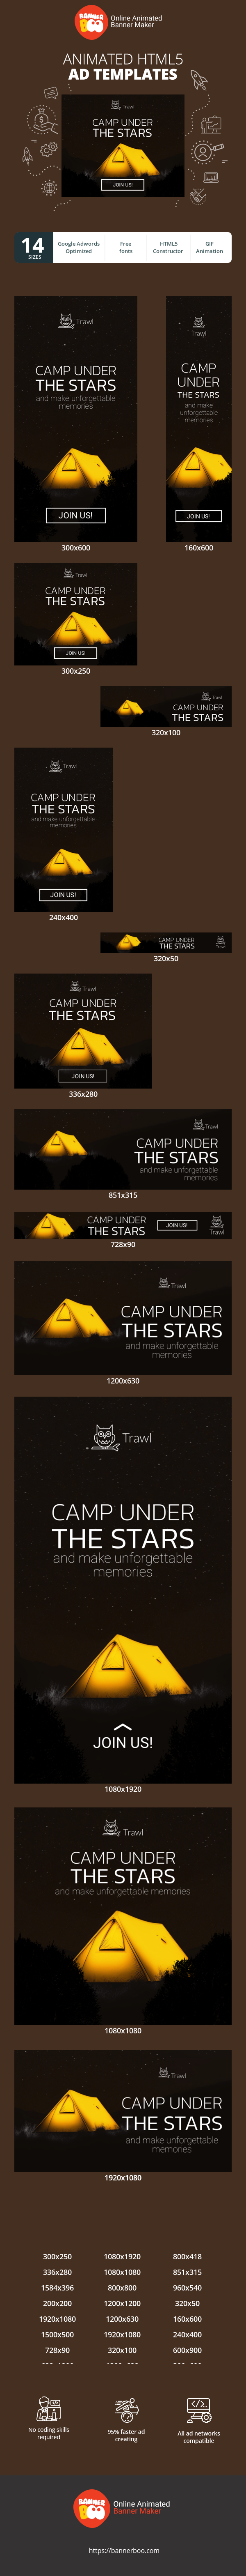 Banner ad template — Camp Under The Stars — And Make Unforgettable Memories